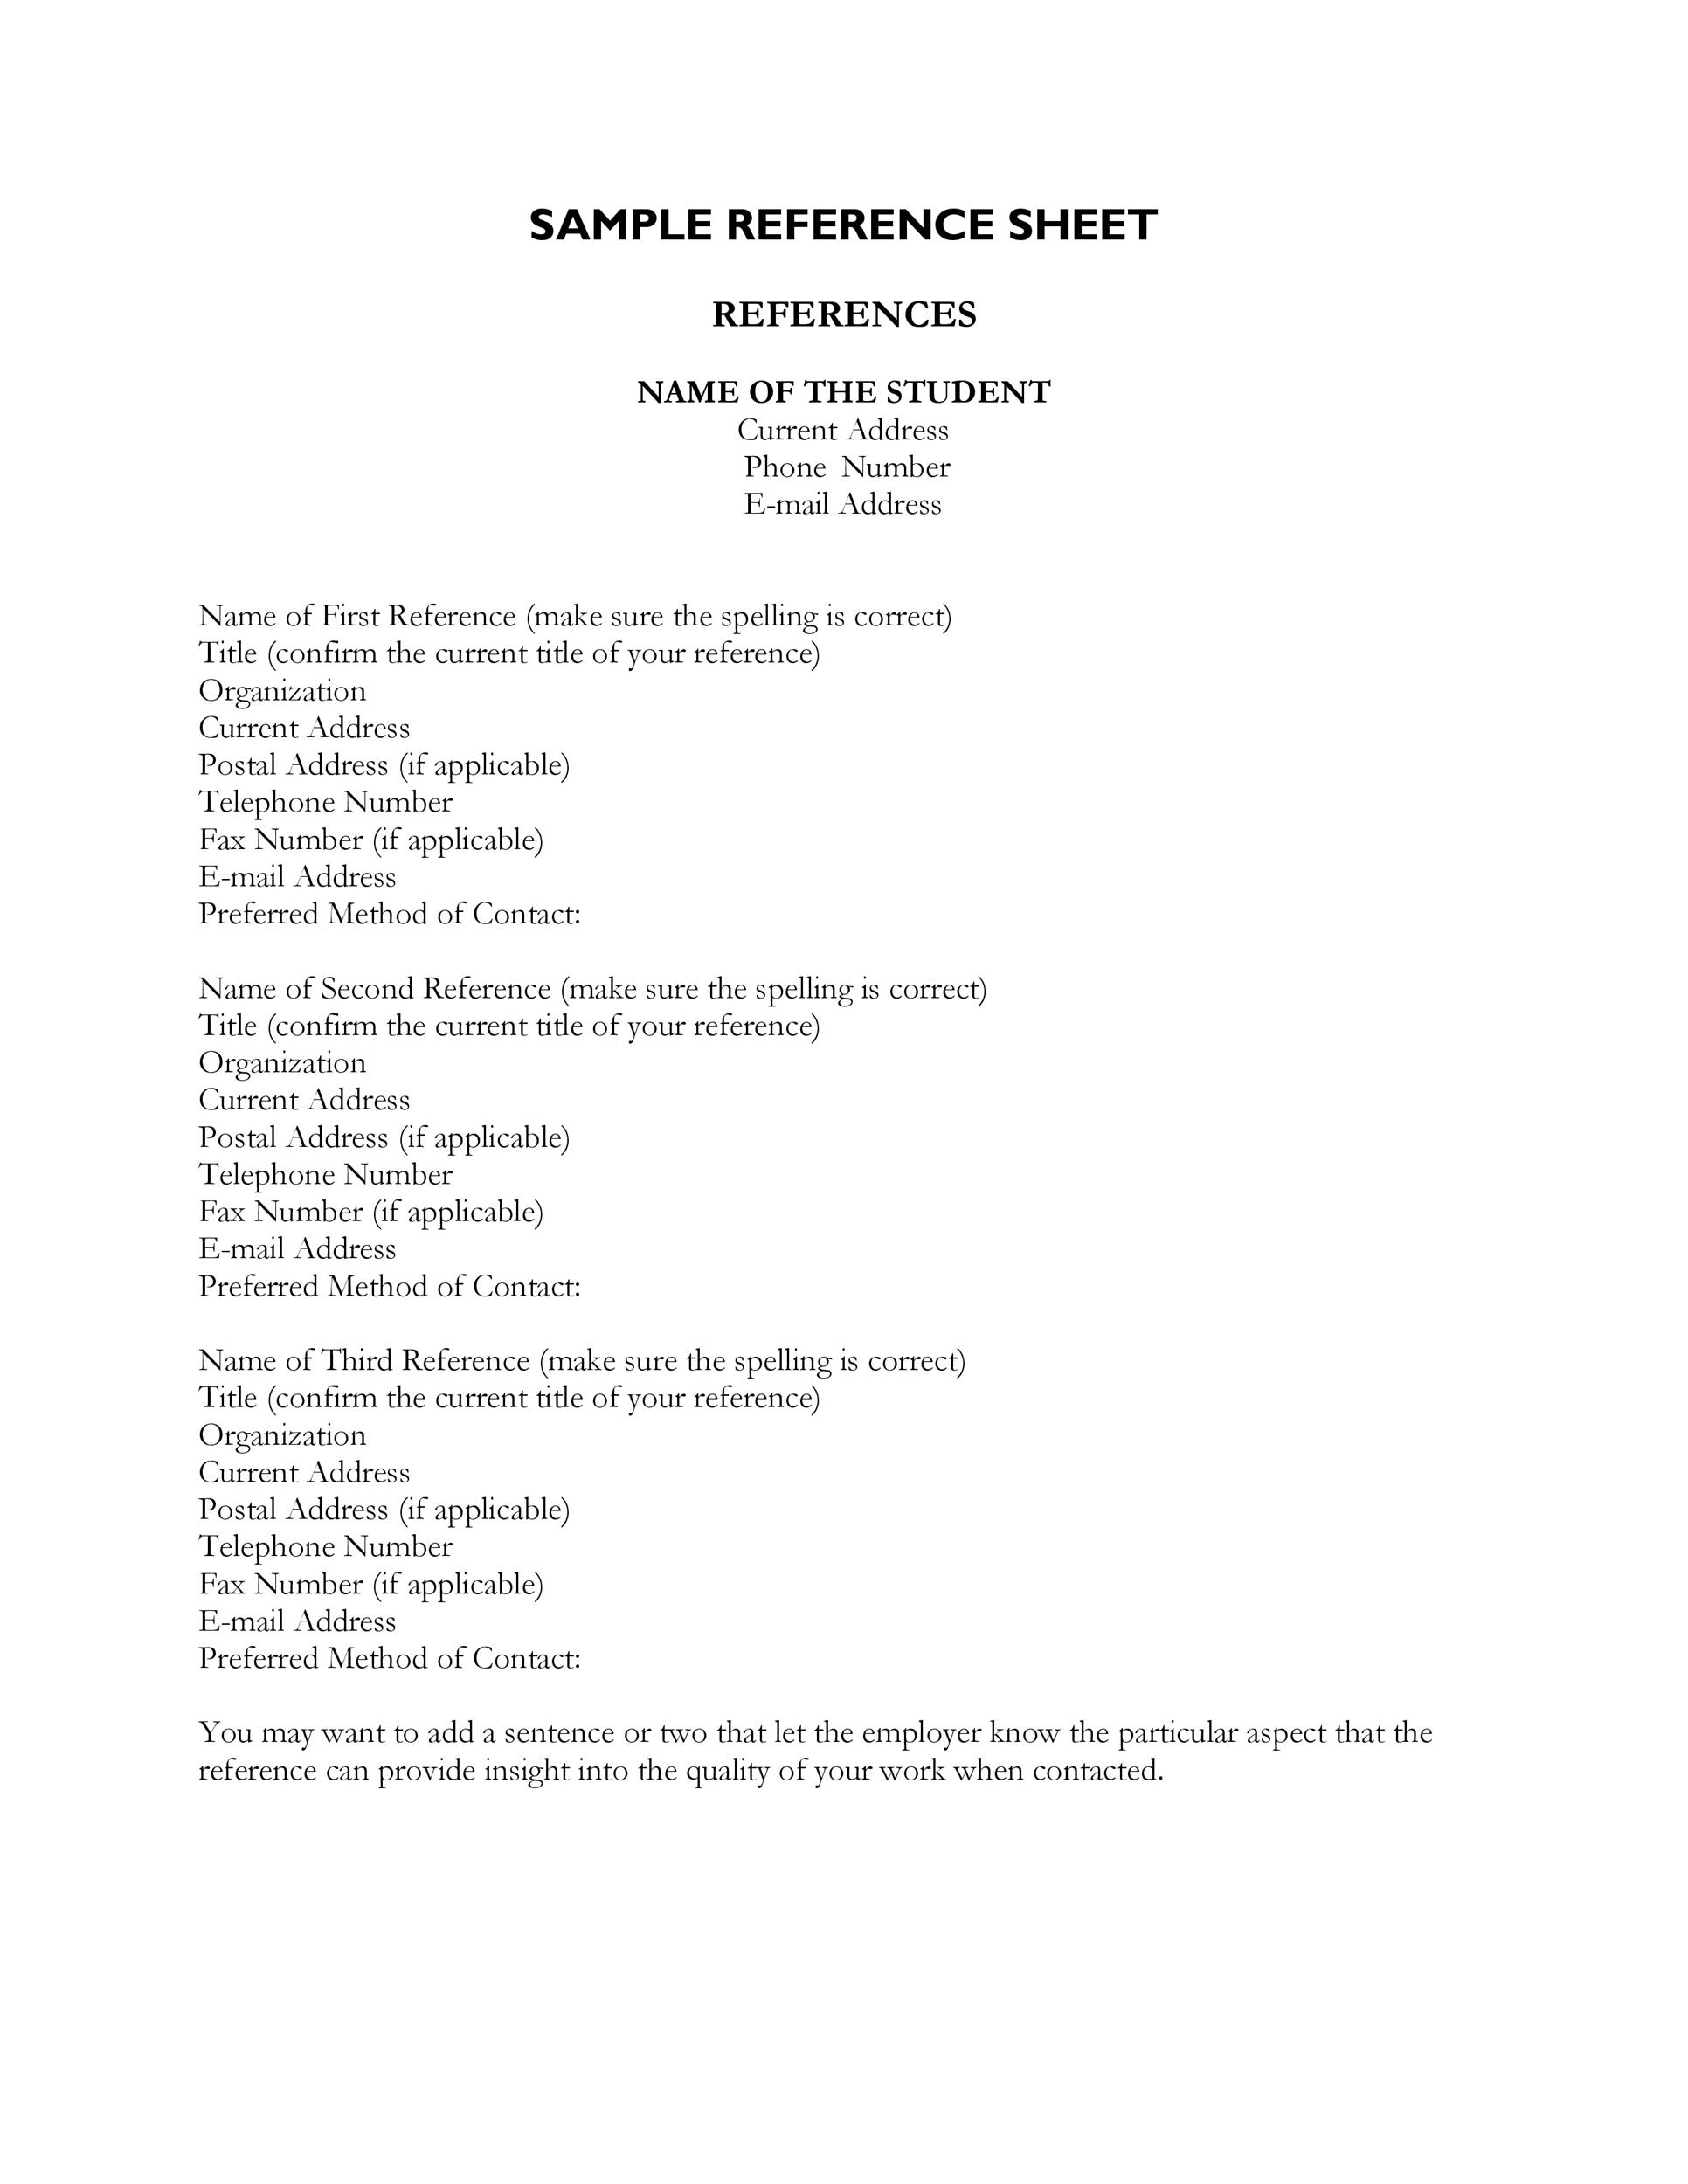 how to create a reference sheet for resume